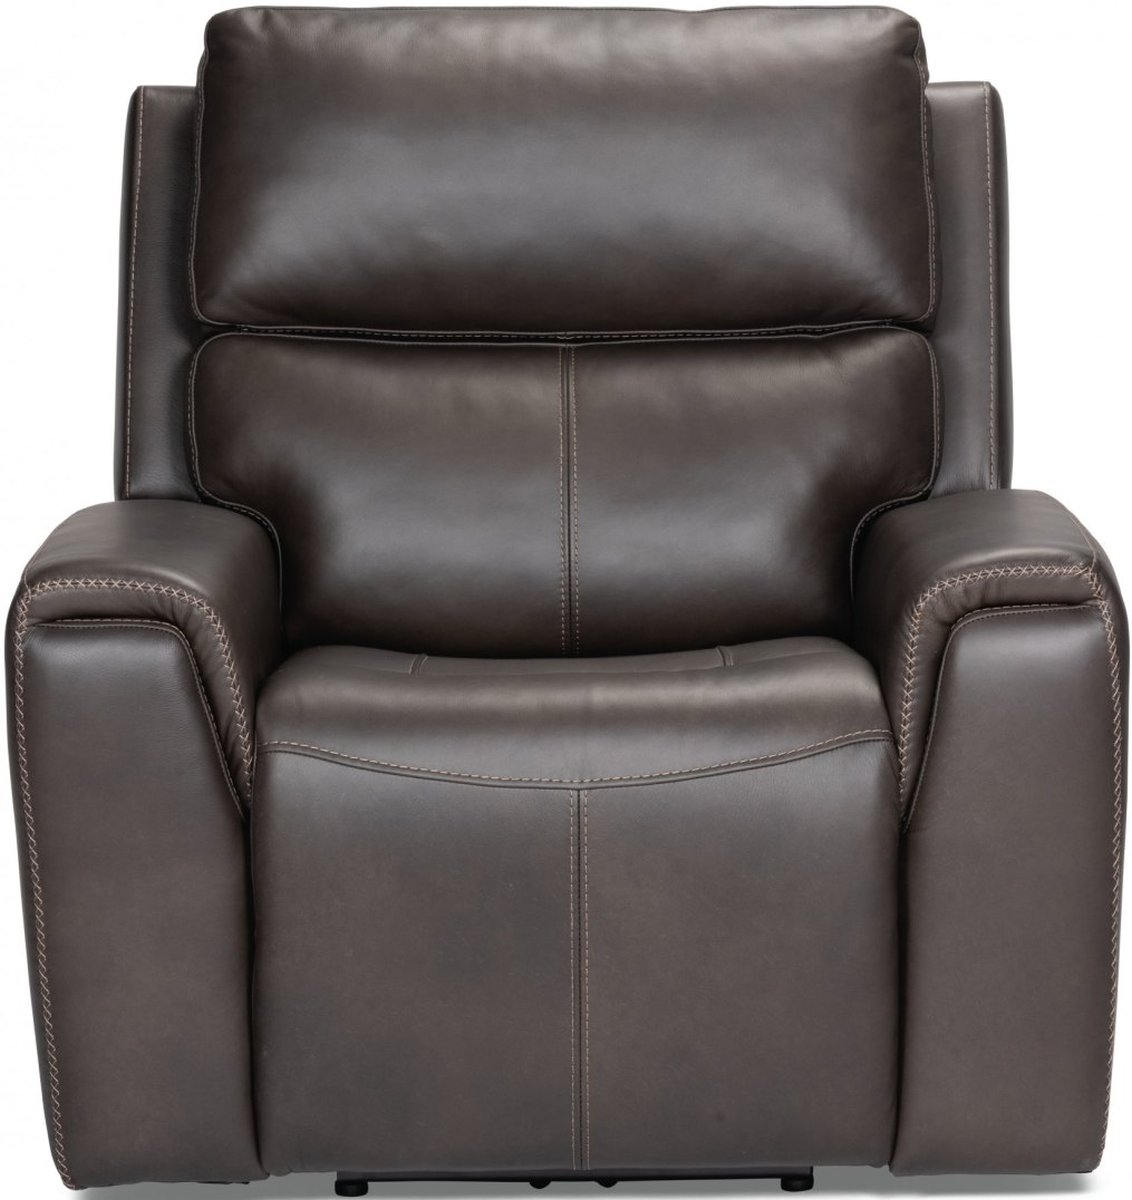 Flexsteel® Jarvis Mica Leather Power Recliner with Power Headrest